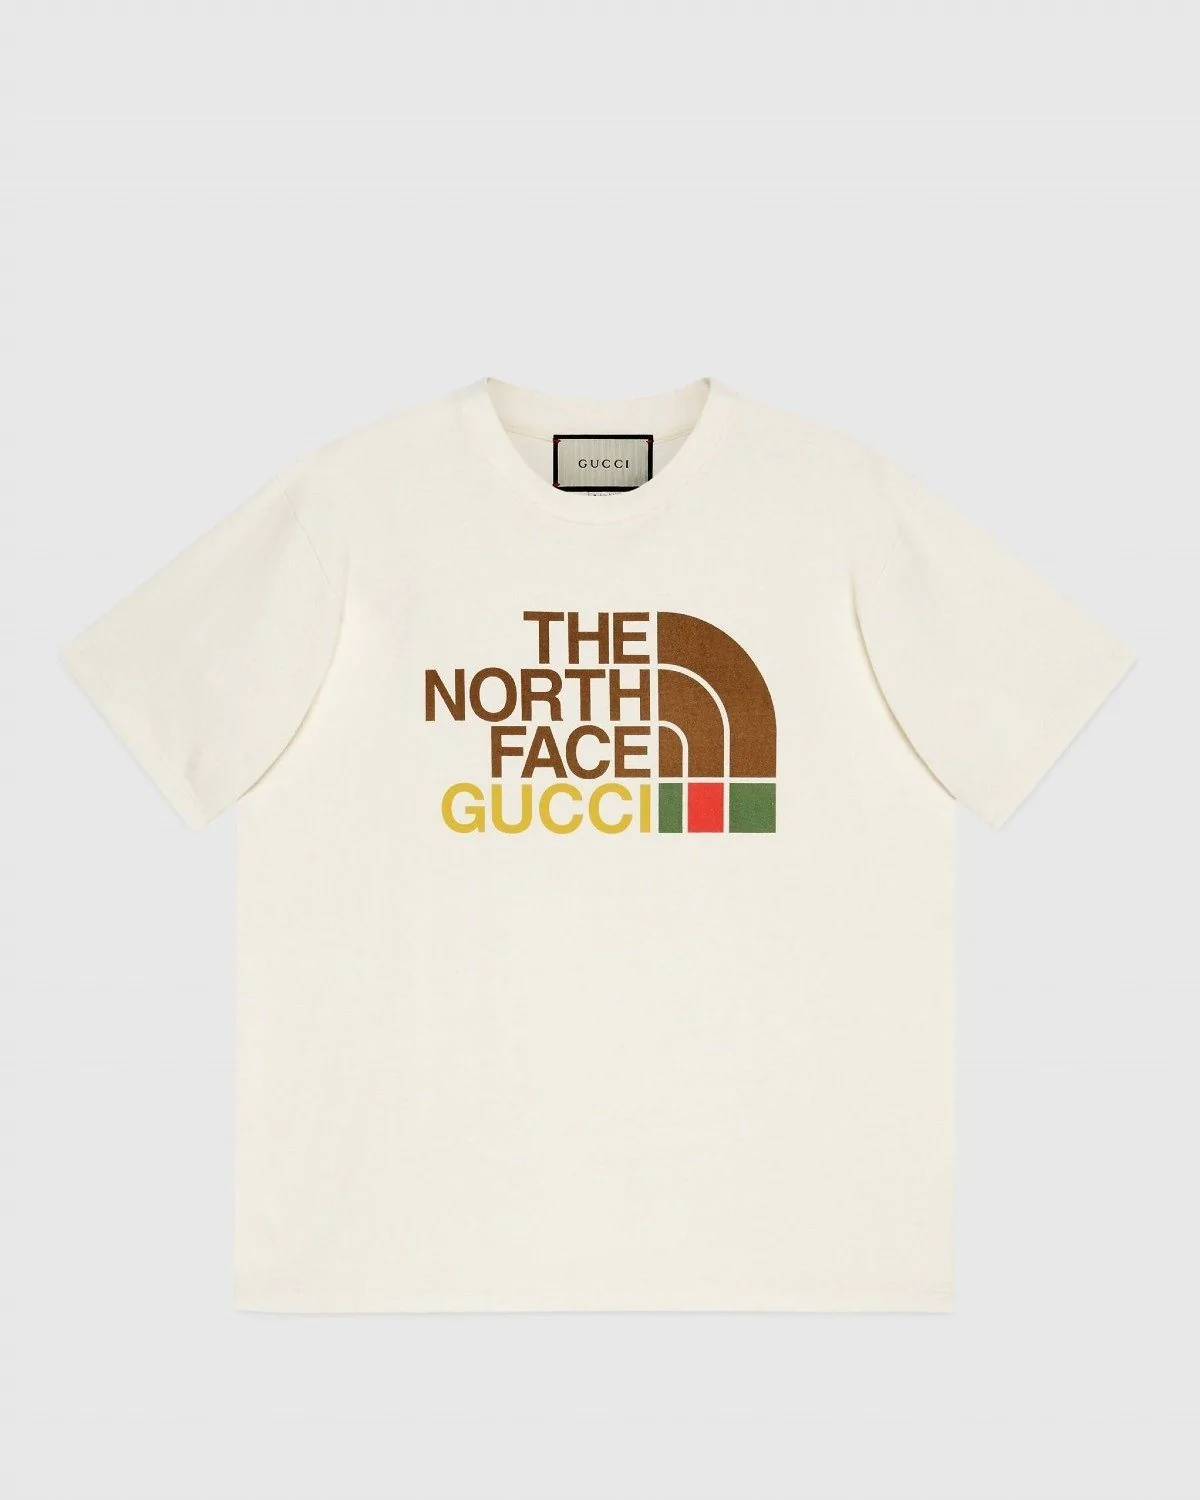 The North Face x Gucci oversize T-shirt